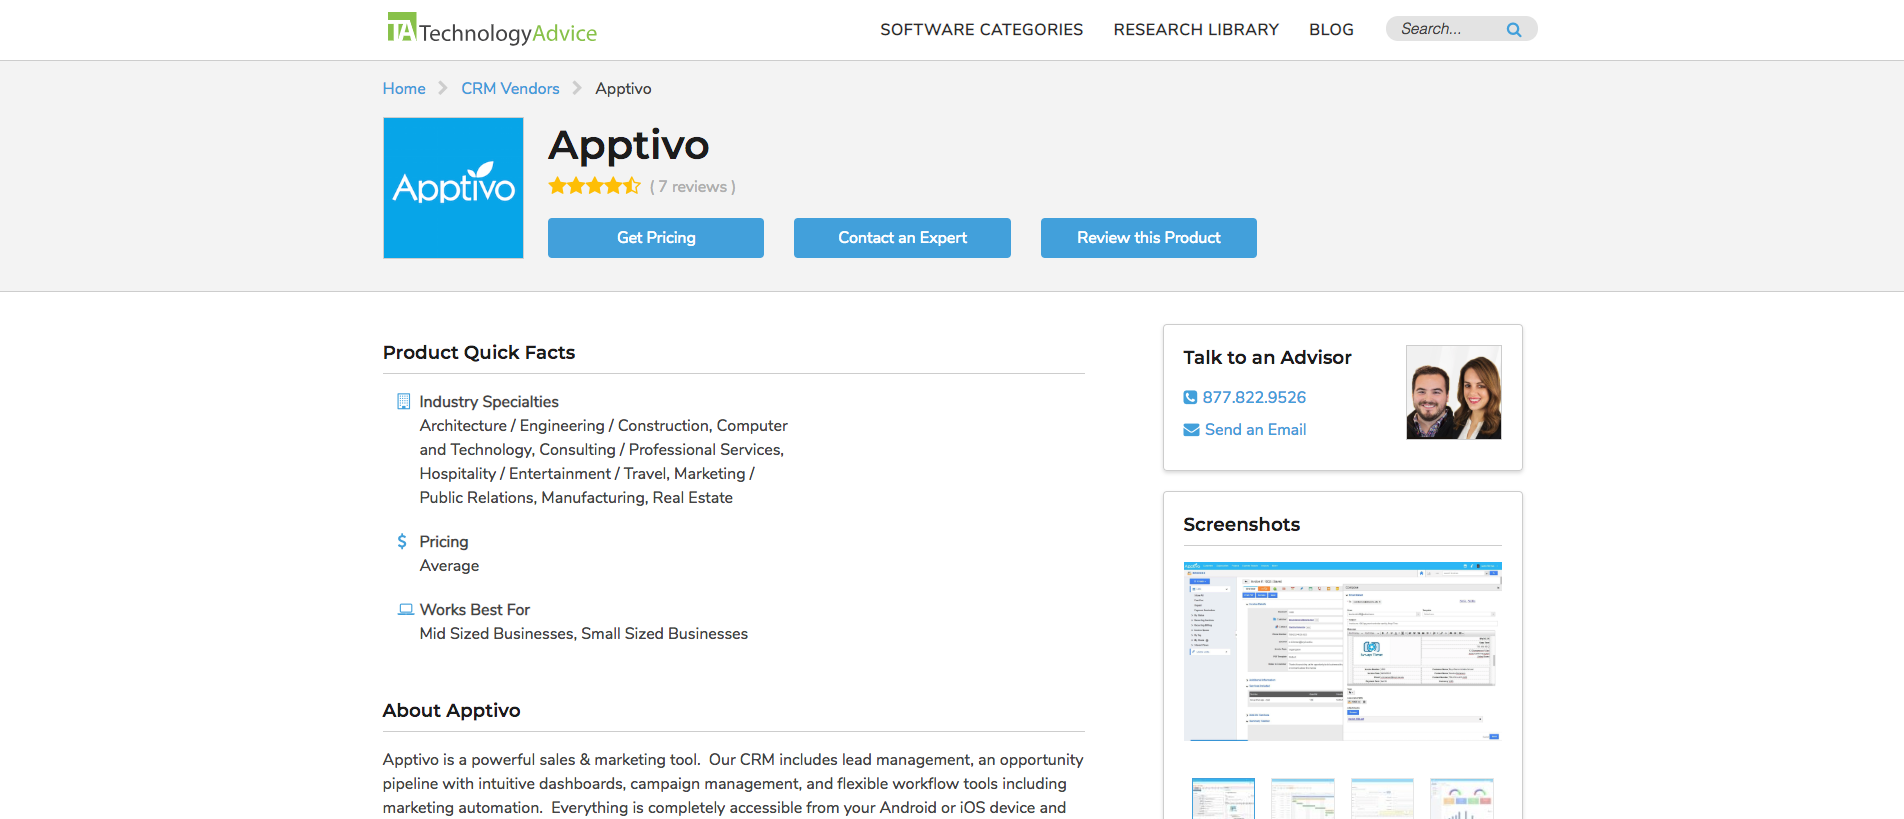 Screenshot of the TechnologyAdvice interface showcasing the Apptivo review page.